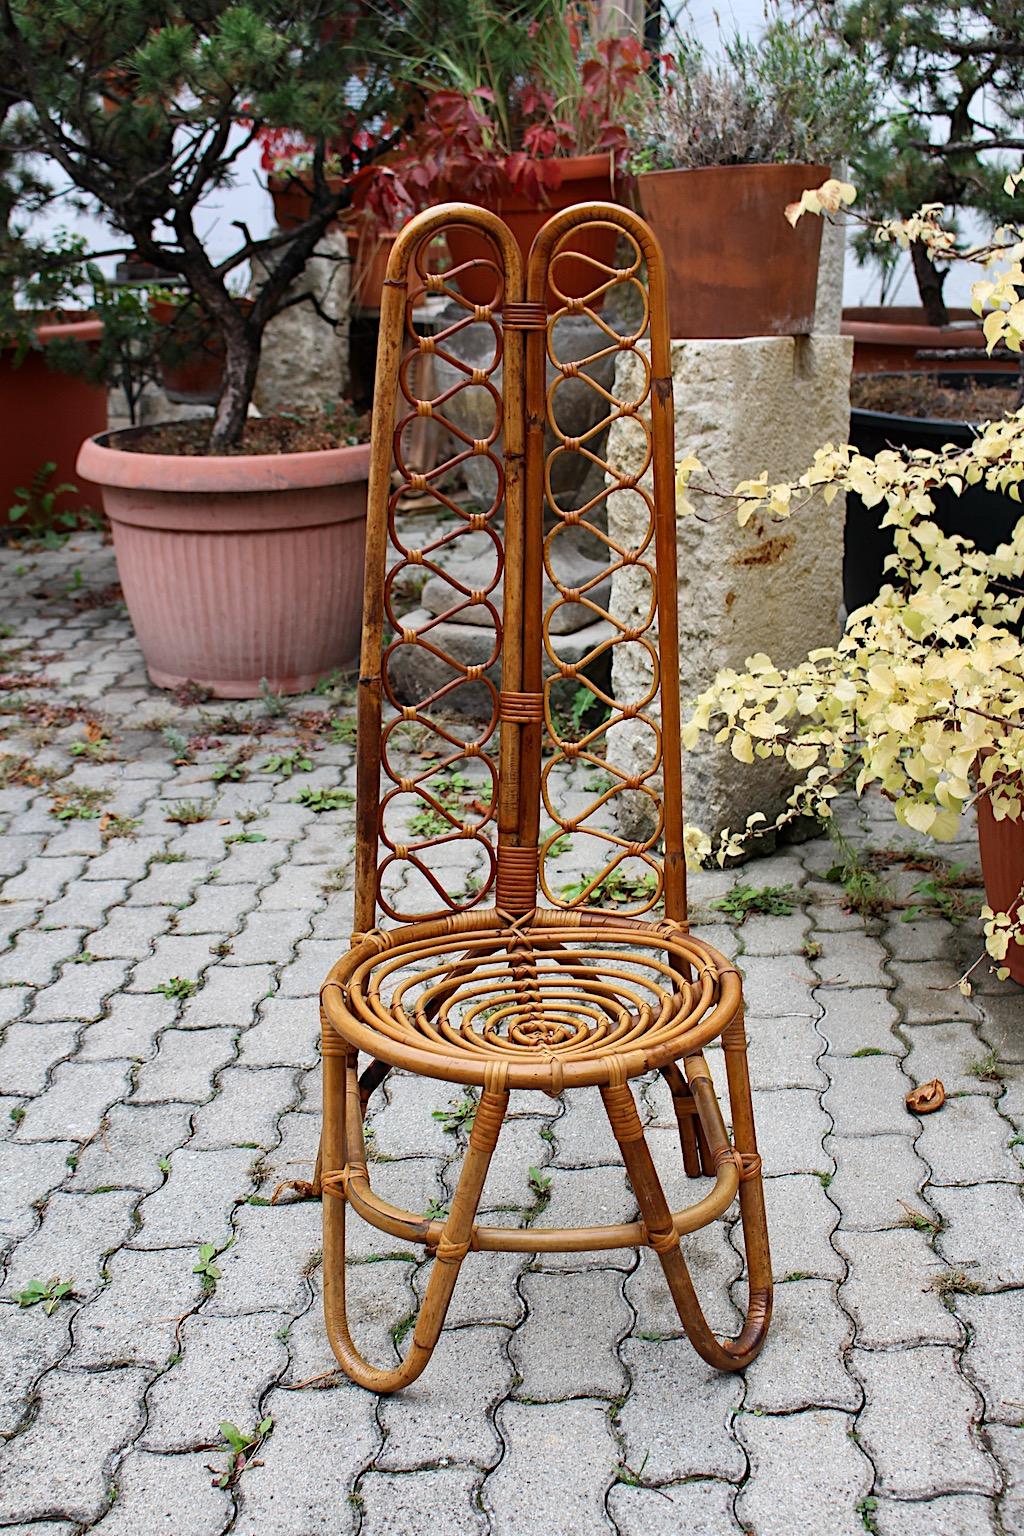 Riviera style vintage organic side chair with highback seat attributed to Bonacina 1960s, Italy.
A stunning solo vintage organic highback chair in brown color with beautiful wickerwork.
This side chair could perfectly work as side chair combining